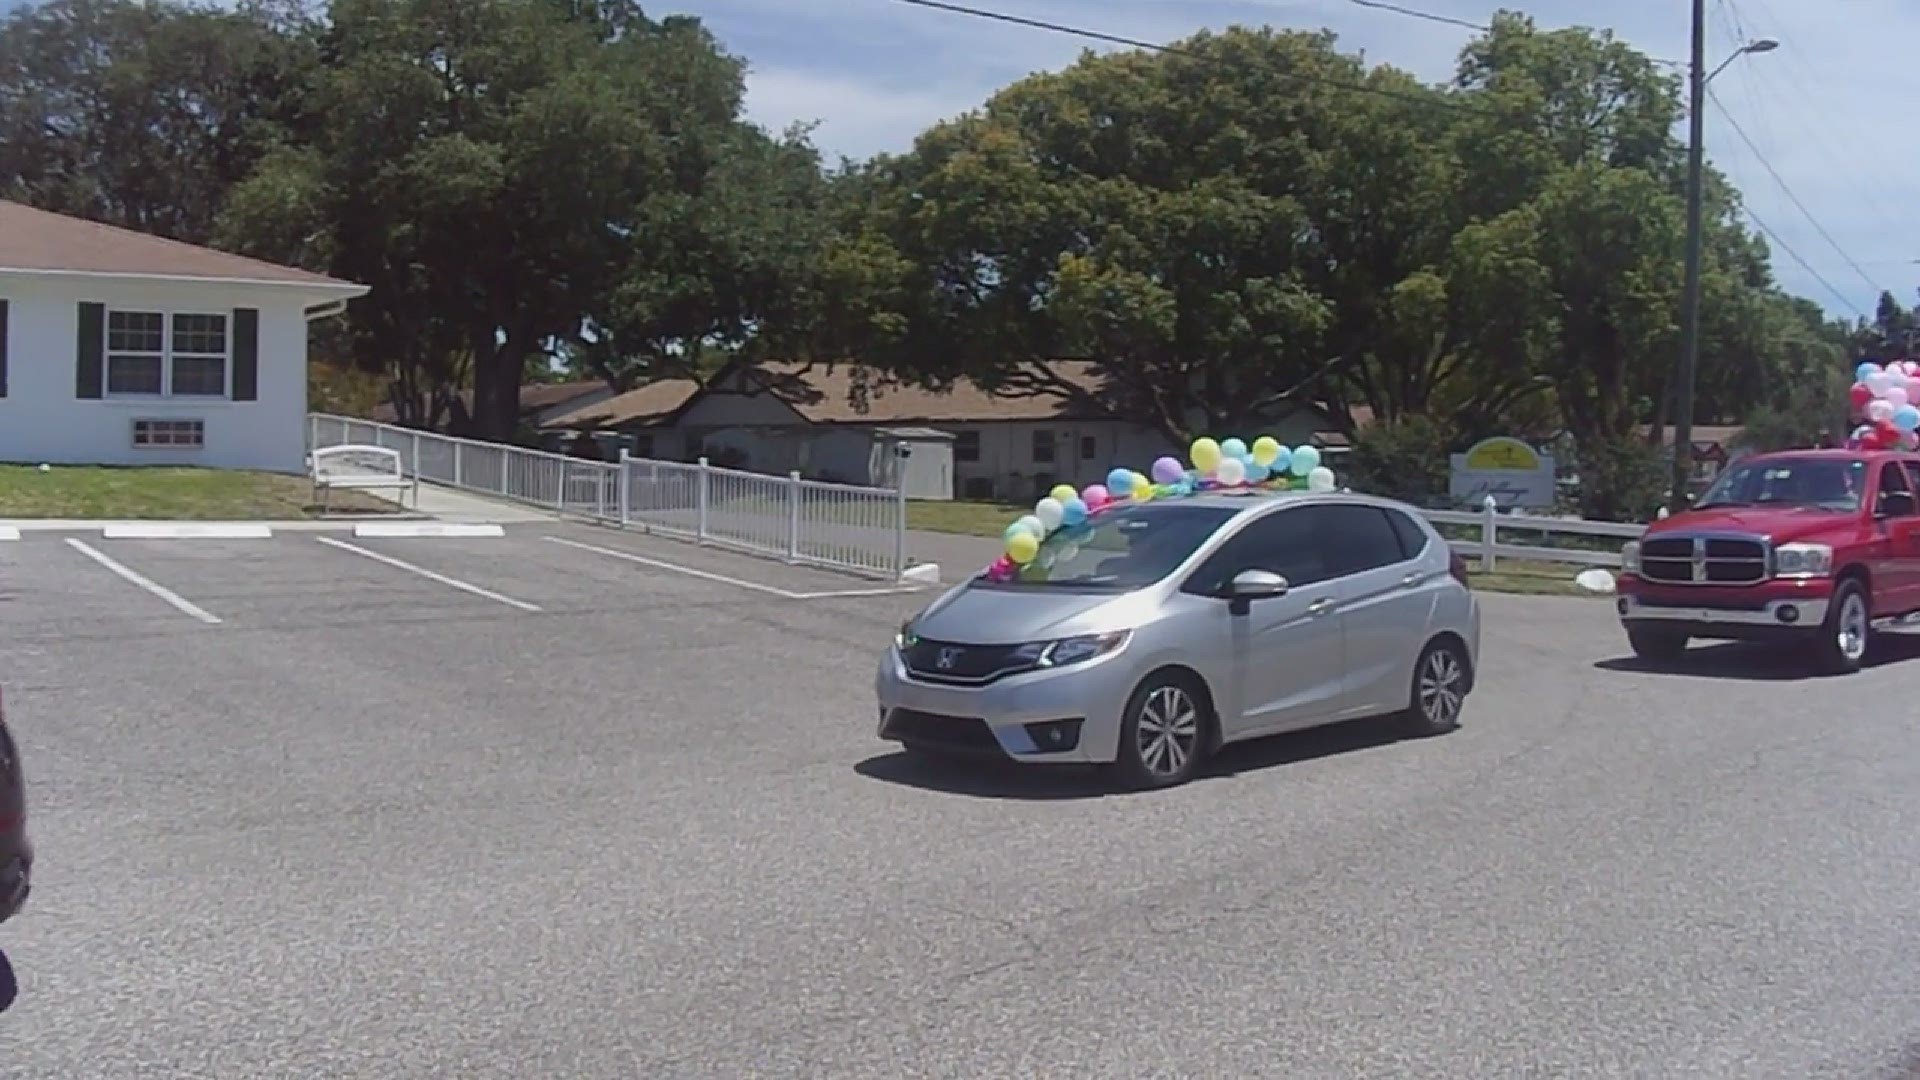 Family members grabbed their keys, balloons and signs to celebrate their loved ones.